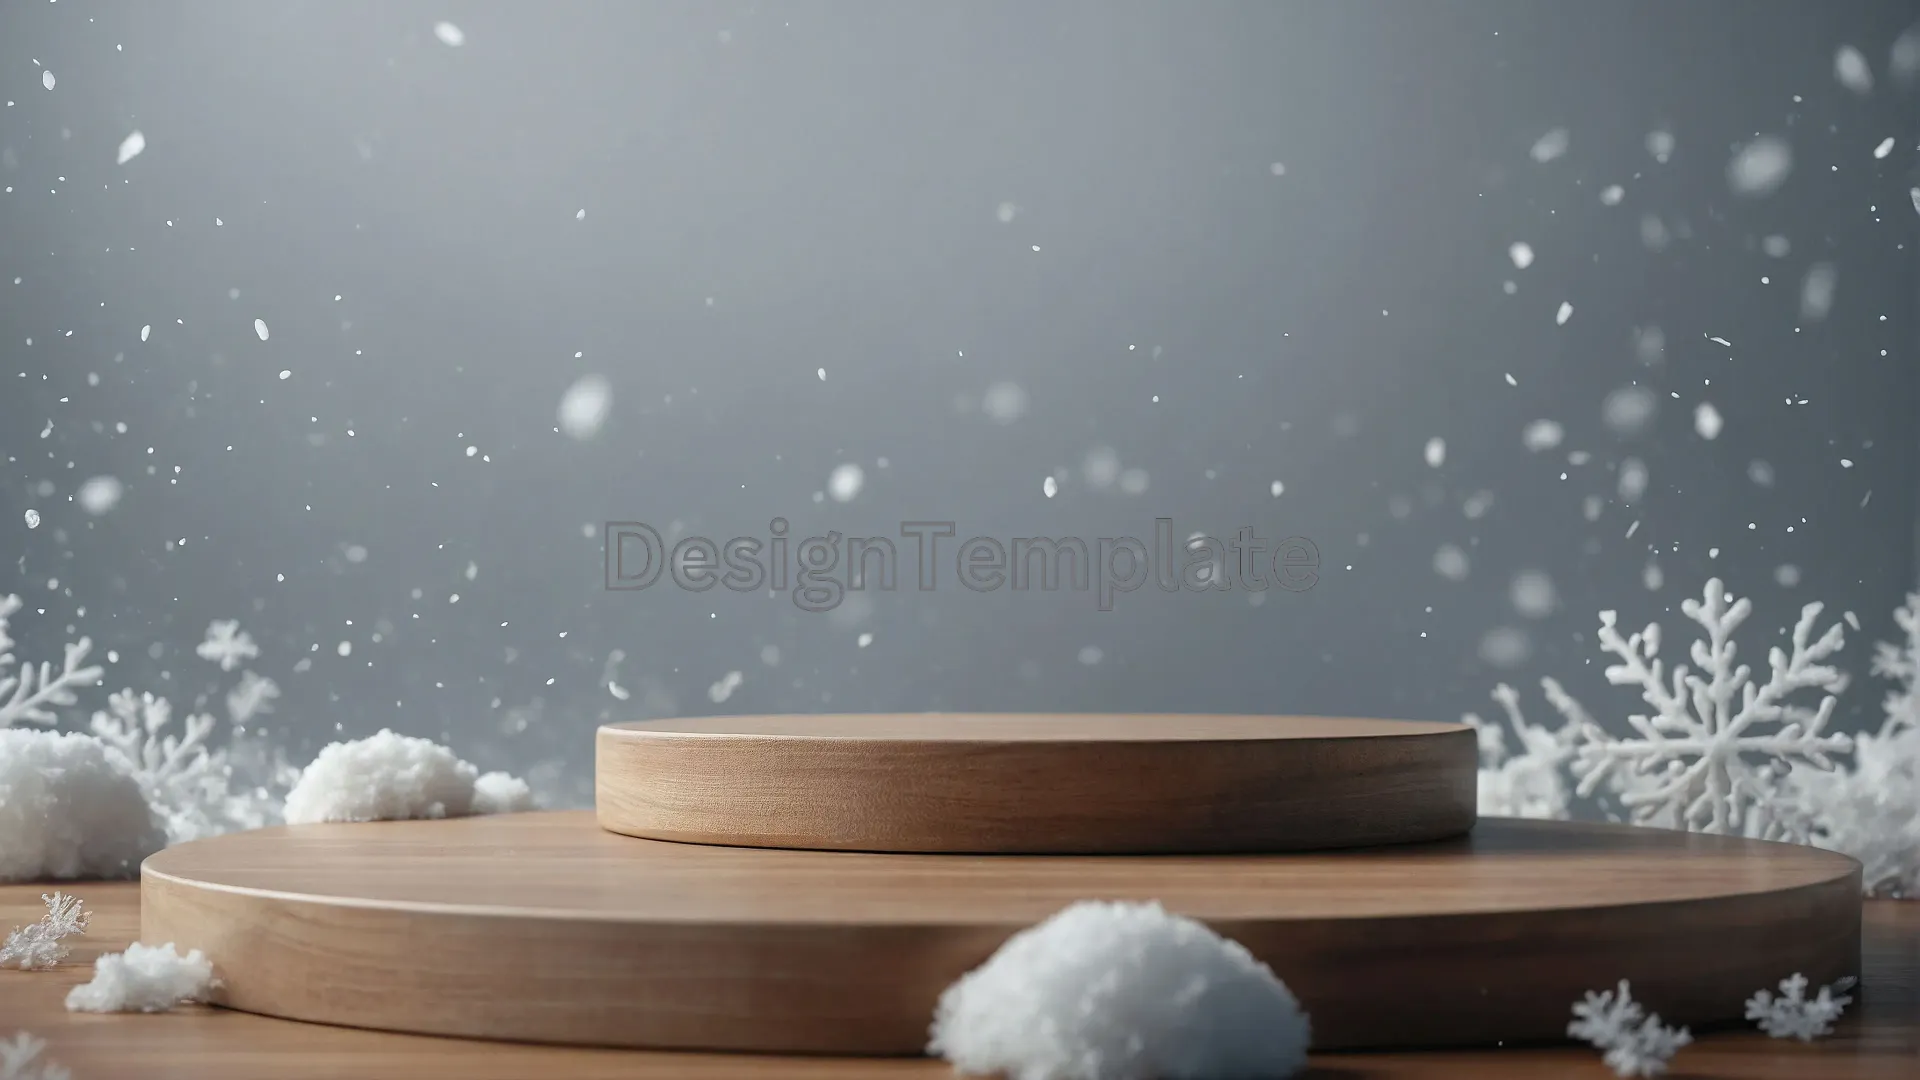 Winter Silence Image Snow-Covered Stones Background image